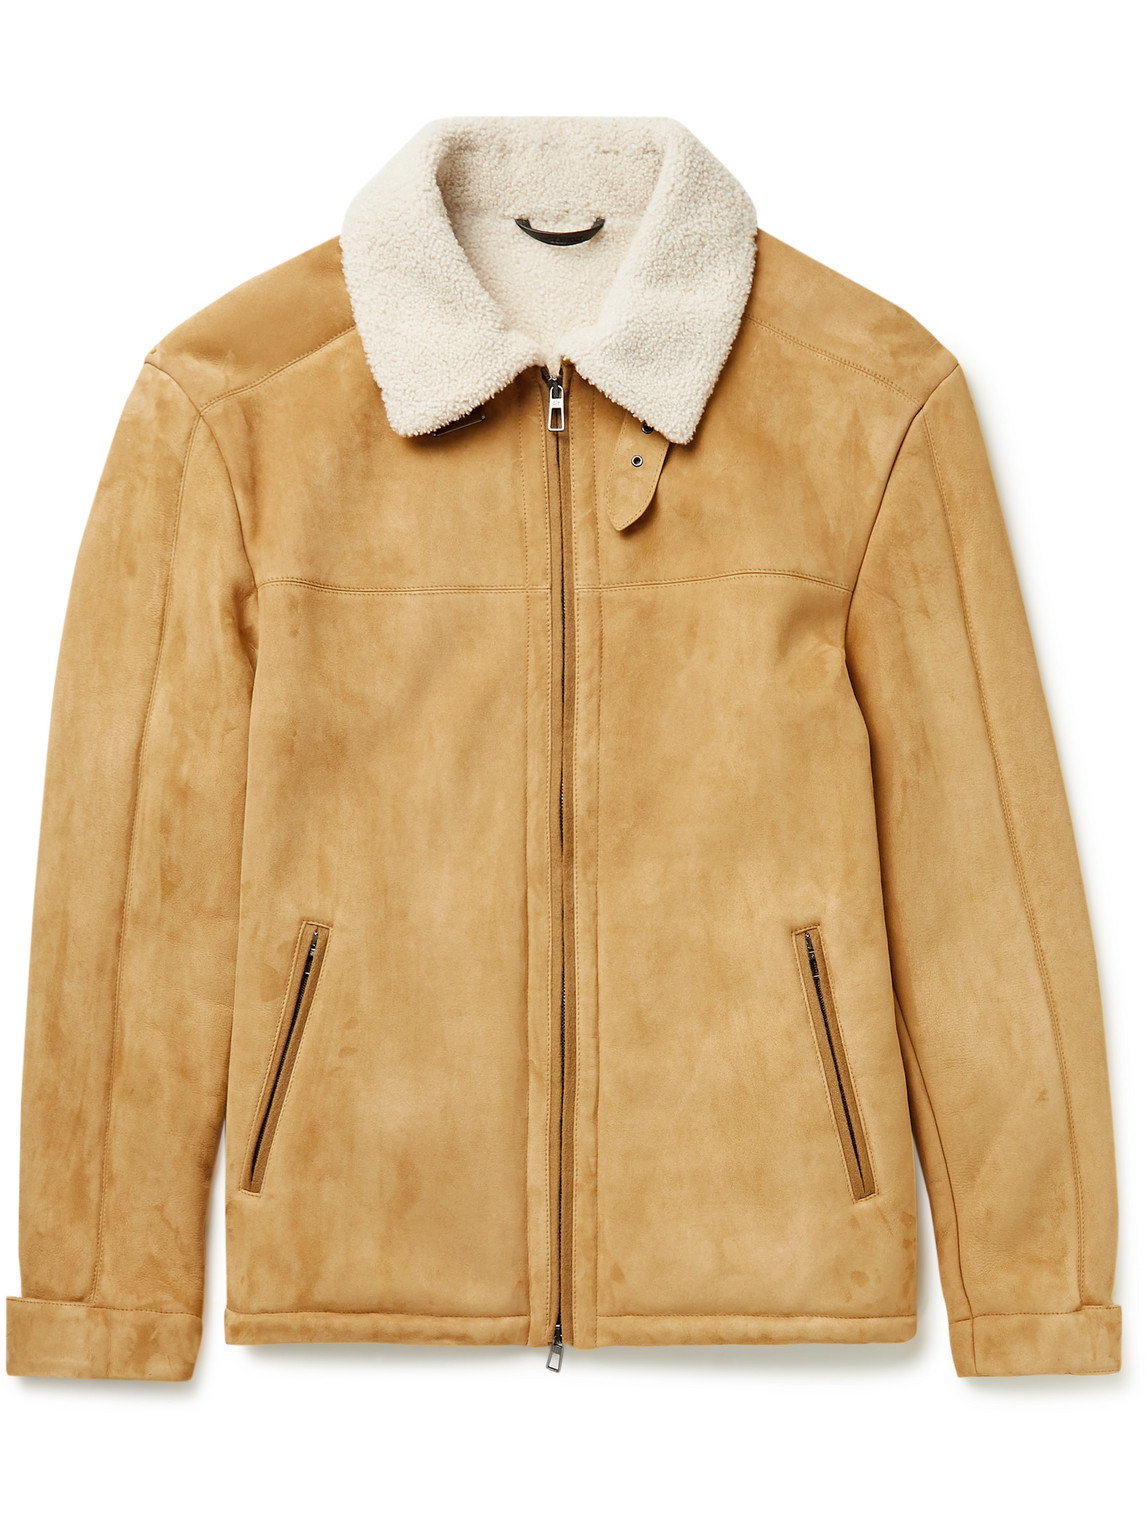 Ravelstone Shearling-Lined Suede Jacket